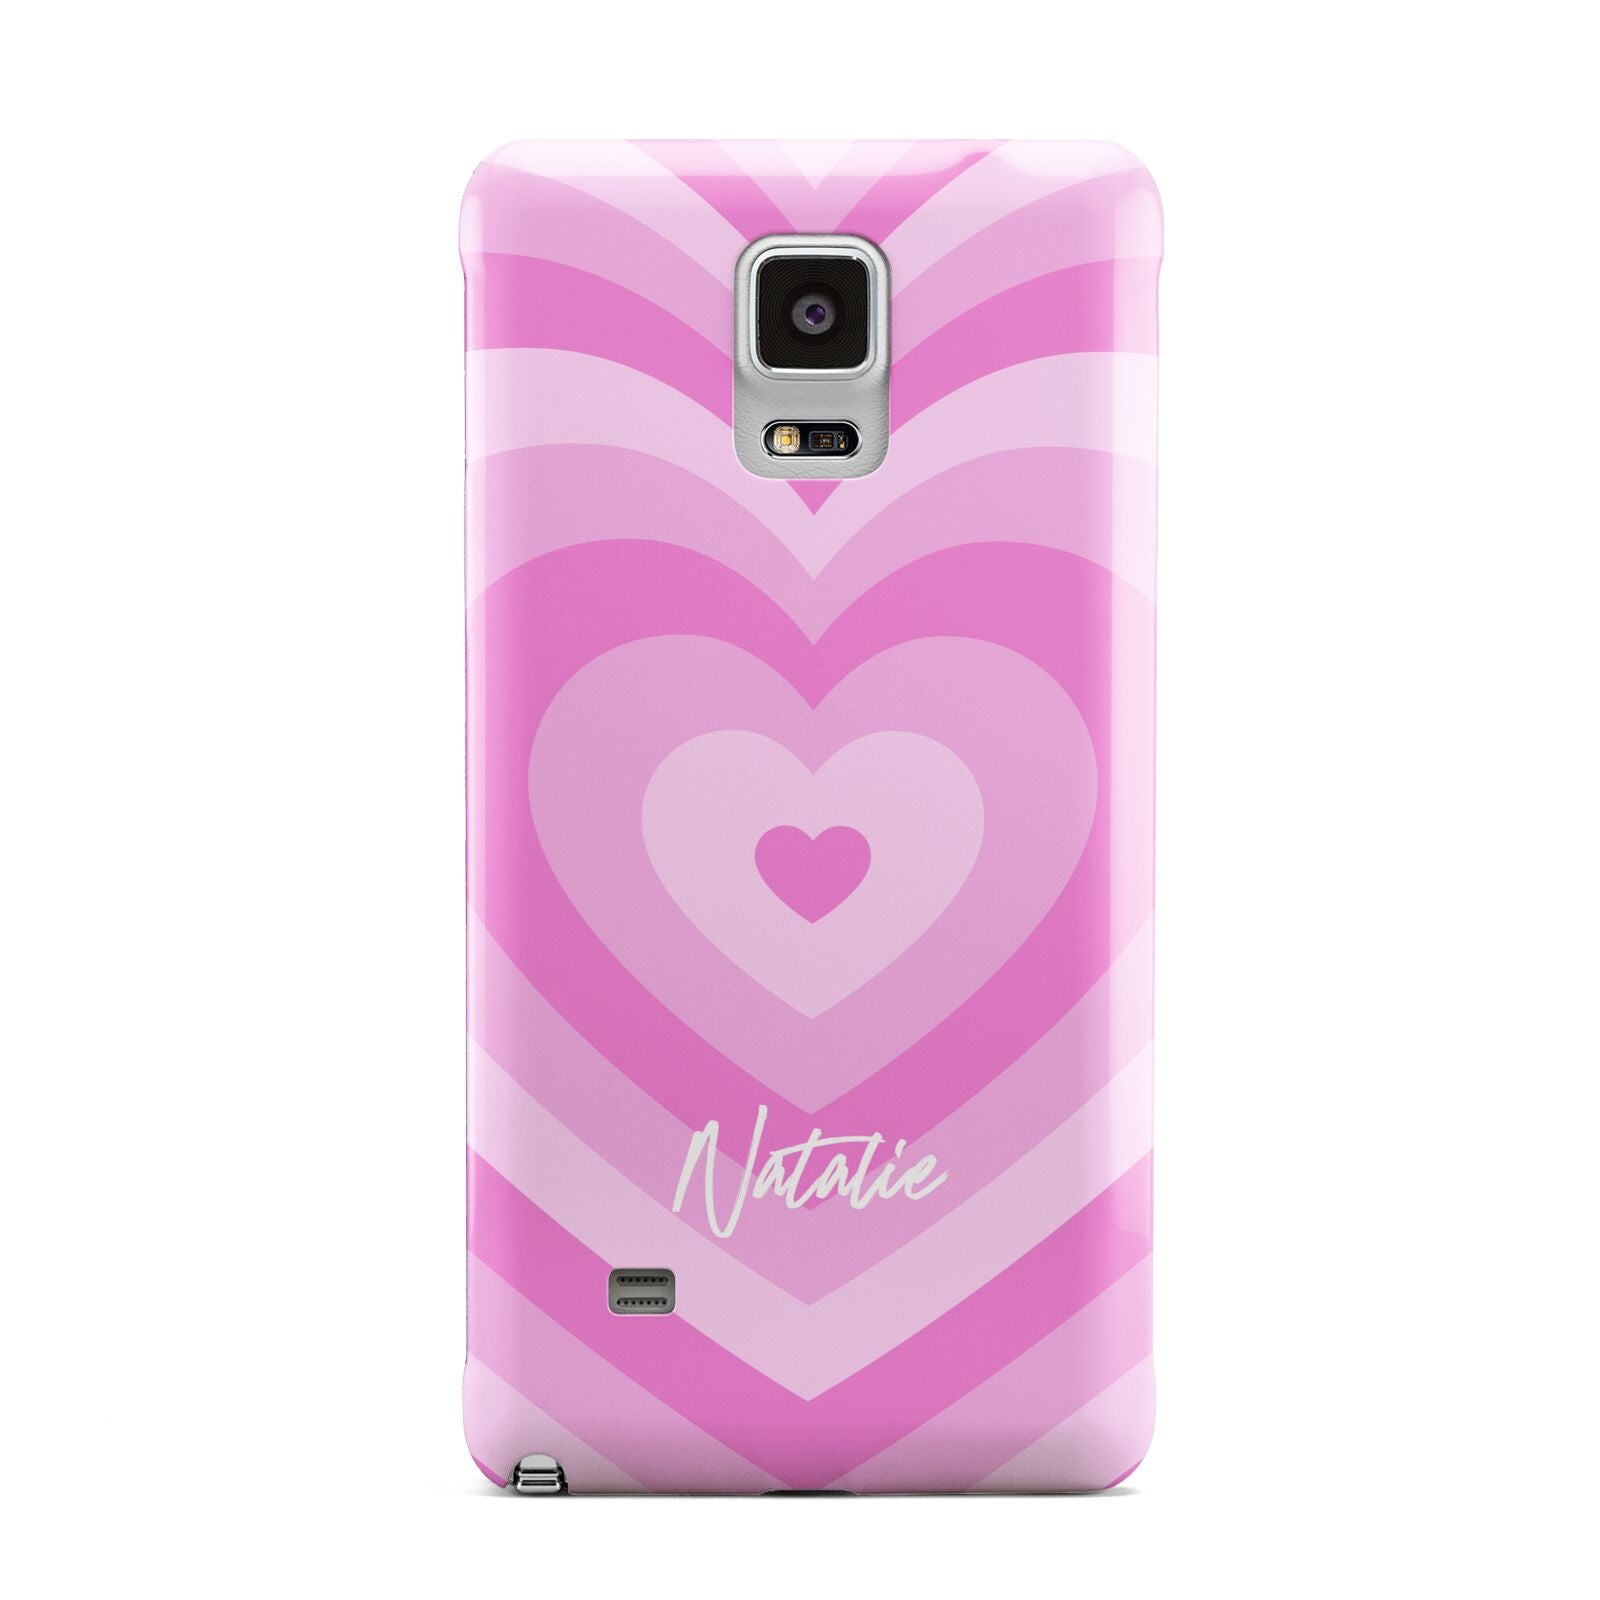 Personalised Pink Heart Samsung Galaxy Note 4 Case